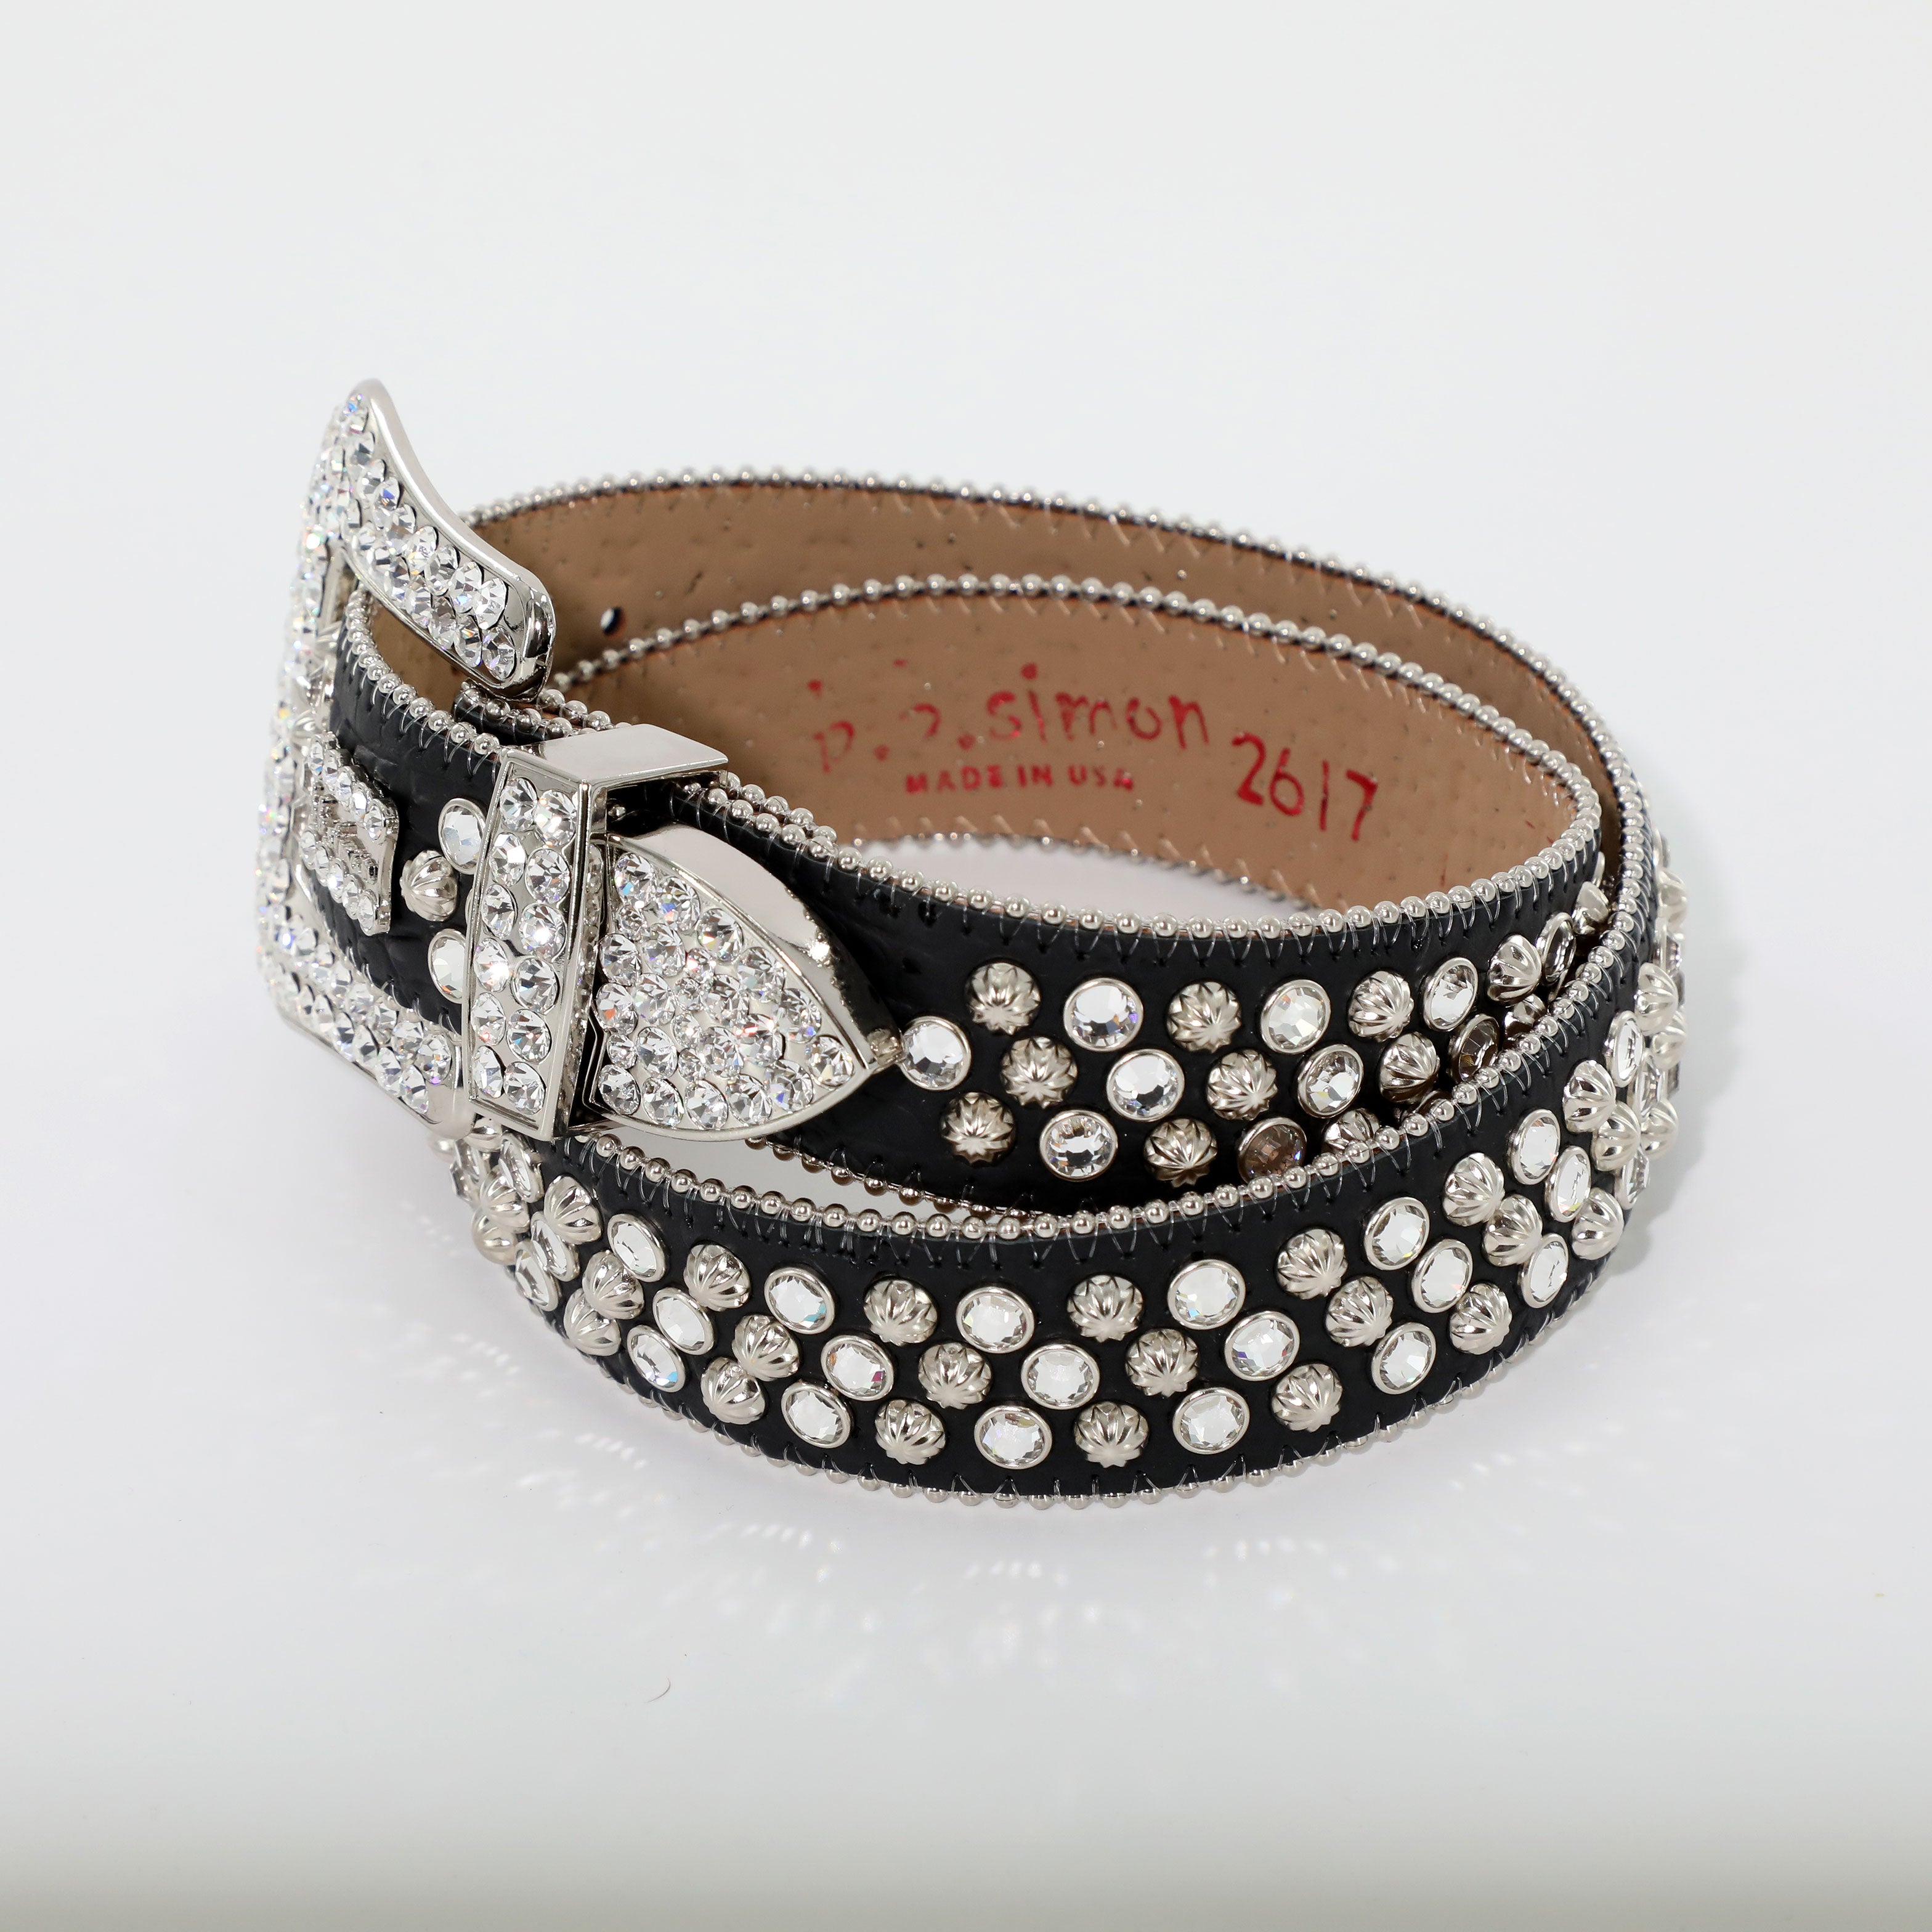 B.B Simon Red Belt with All Silver Crystals and Parachute Studs